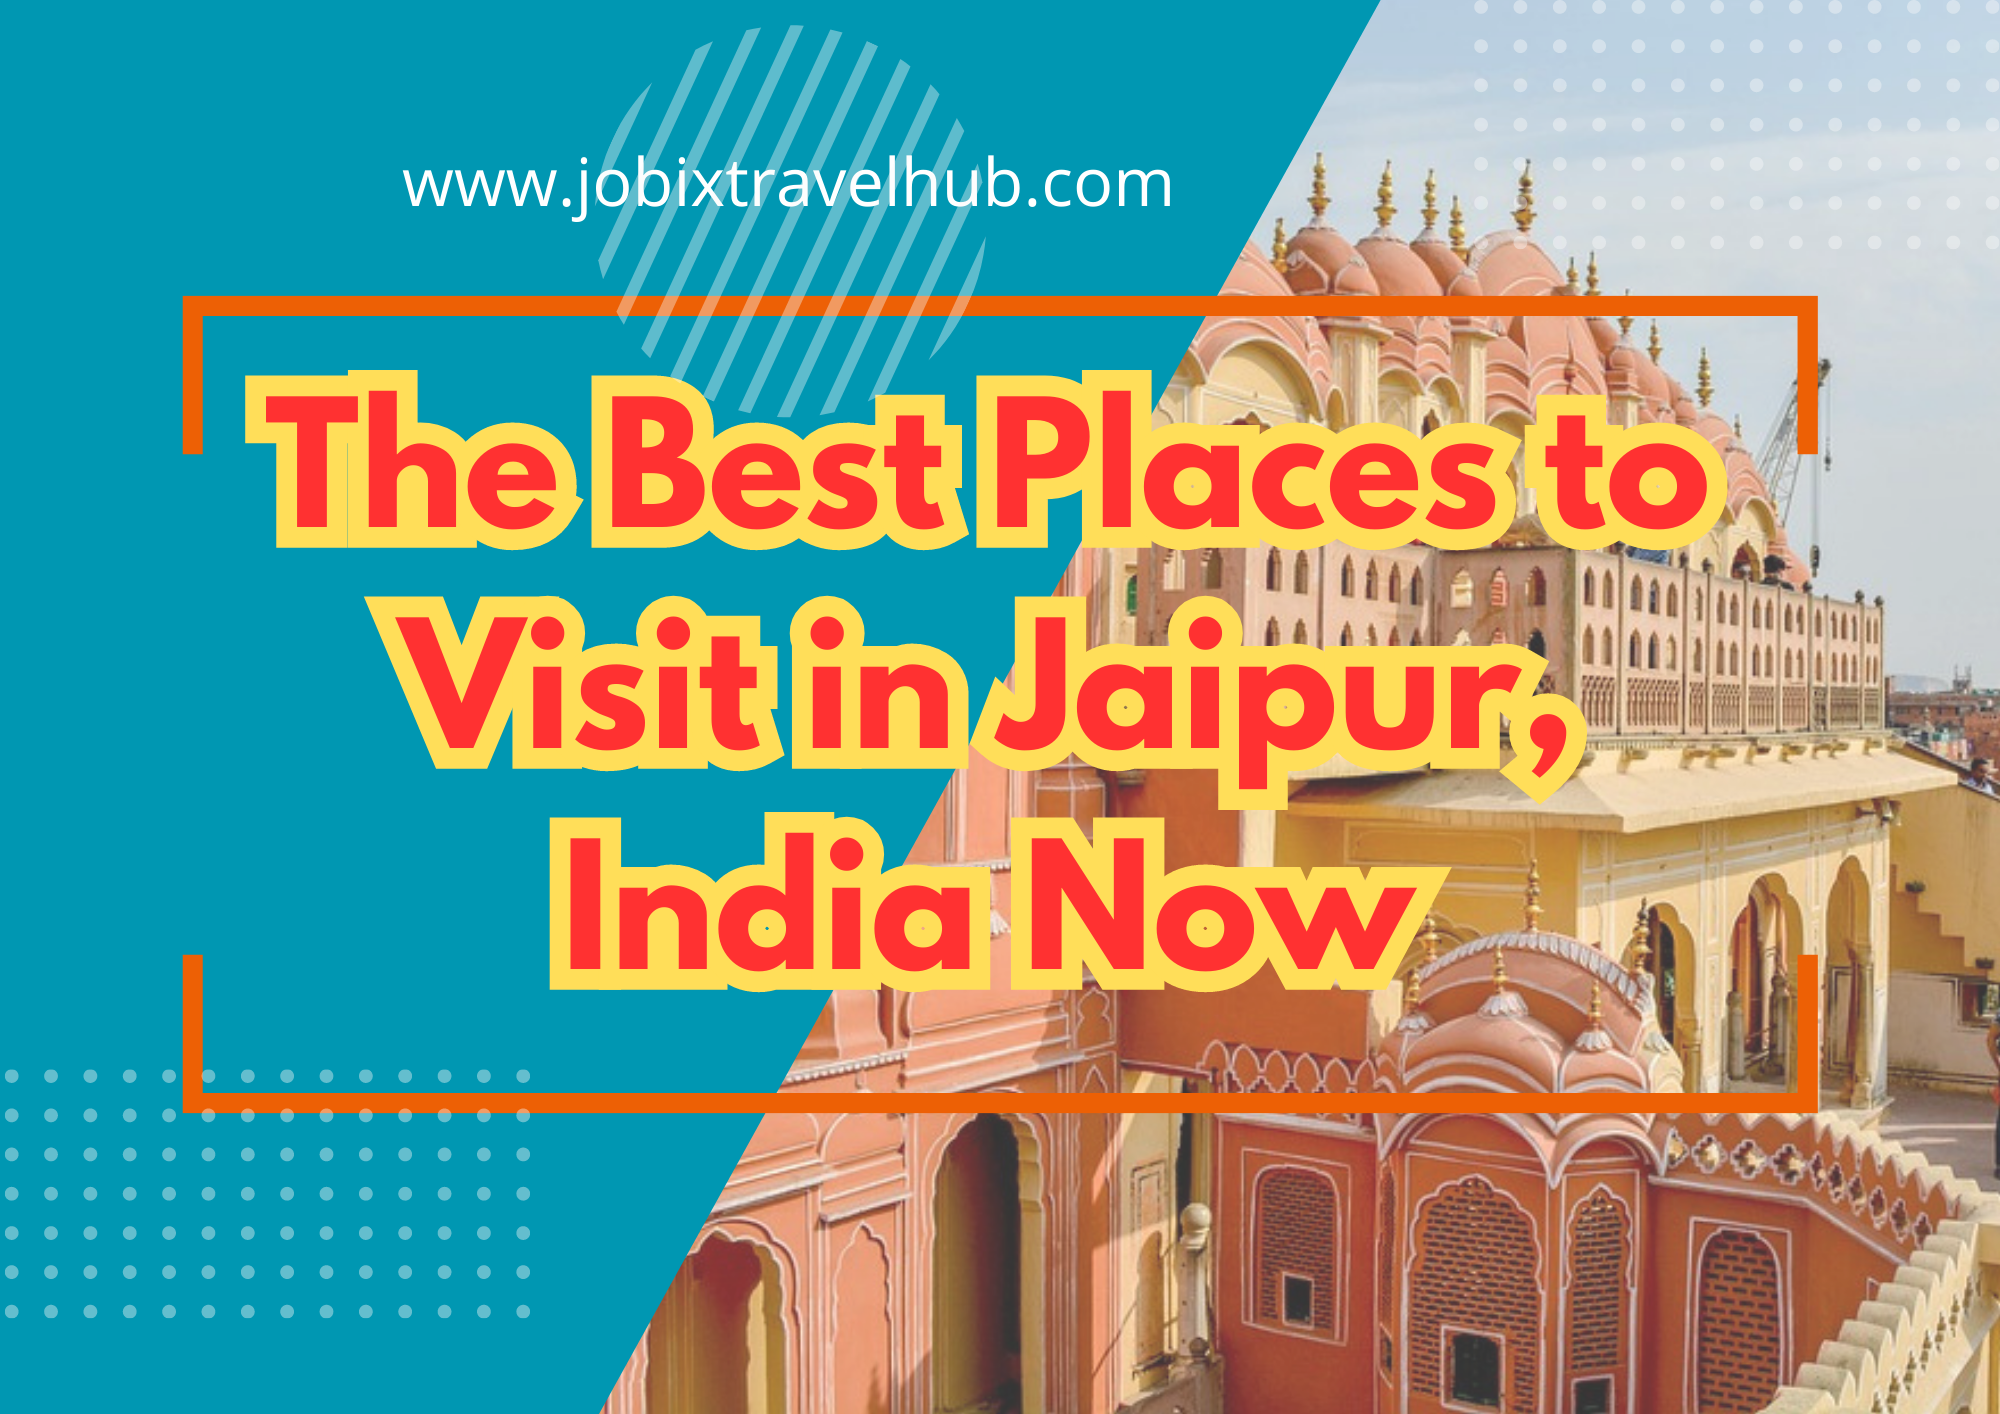 The Best Places to Visit in Jaipur Now - Jobix Travel Hub